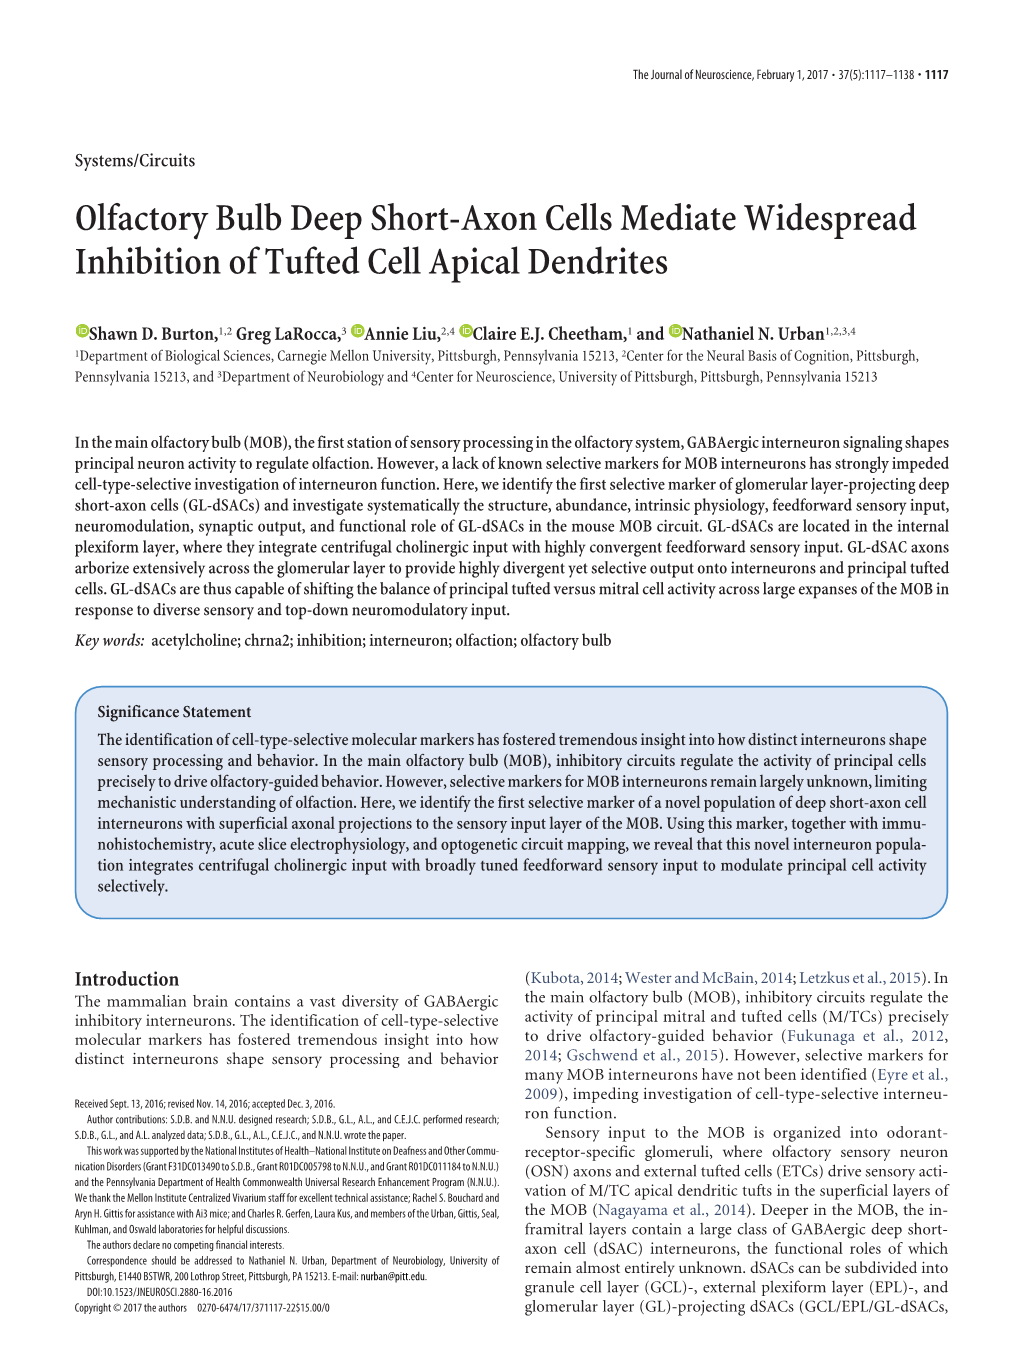 Olfactory Bulb Deep Short-Axon Cells Mediate Widespread Inhibition of Tufted Cell Apical Dendrites